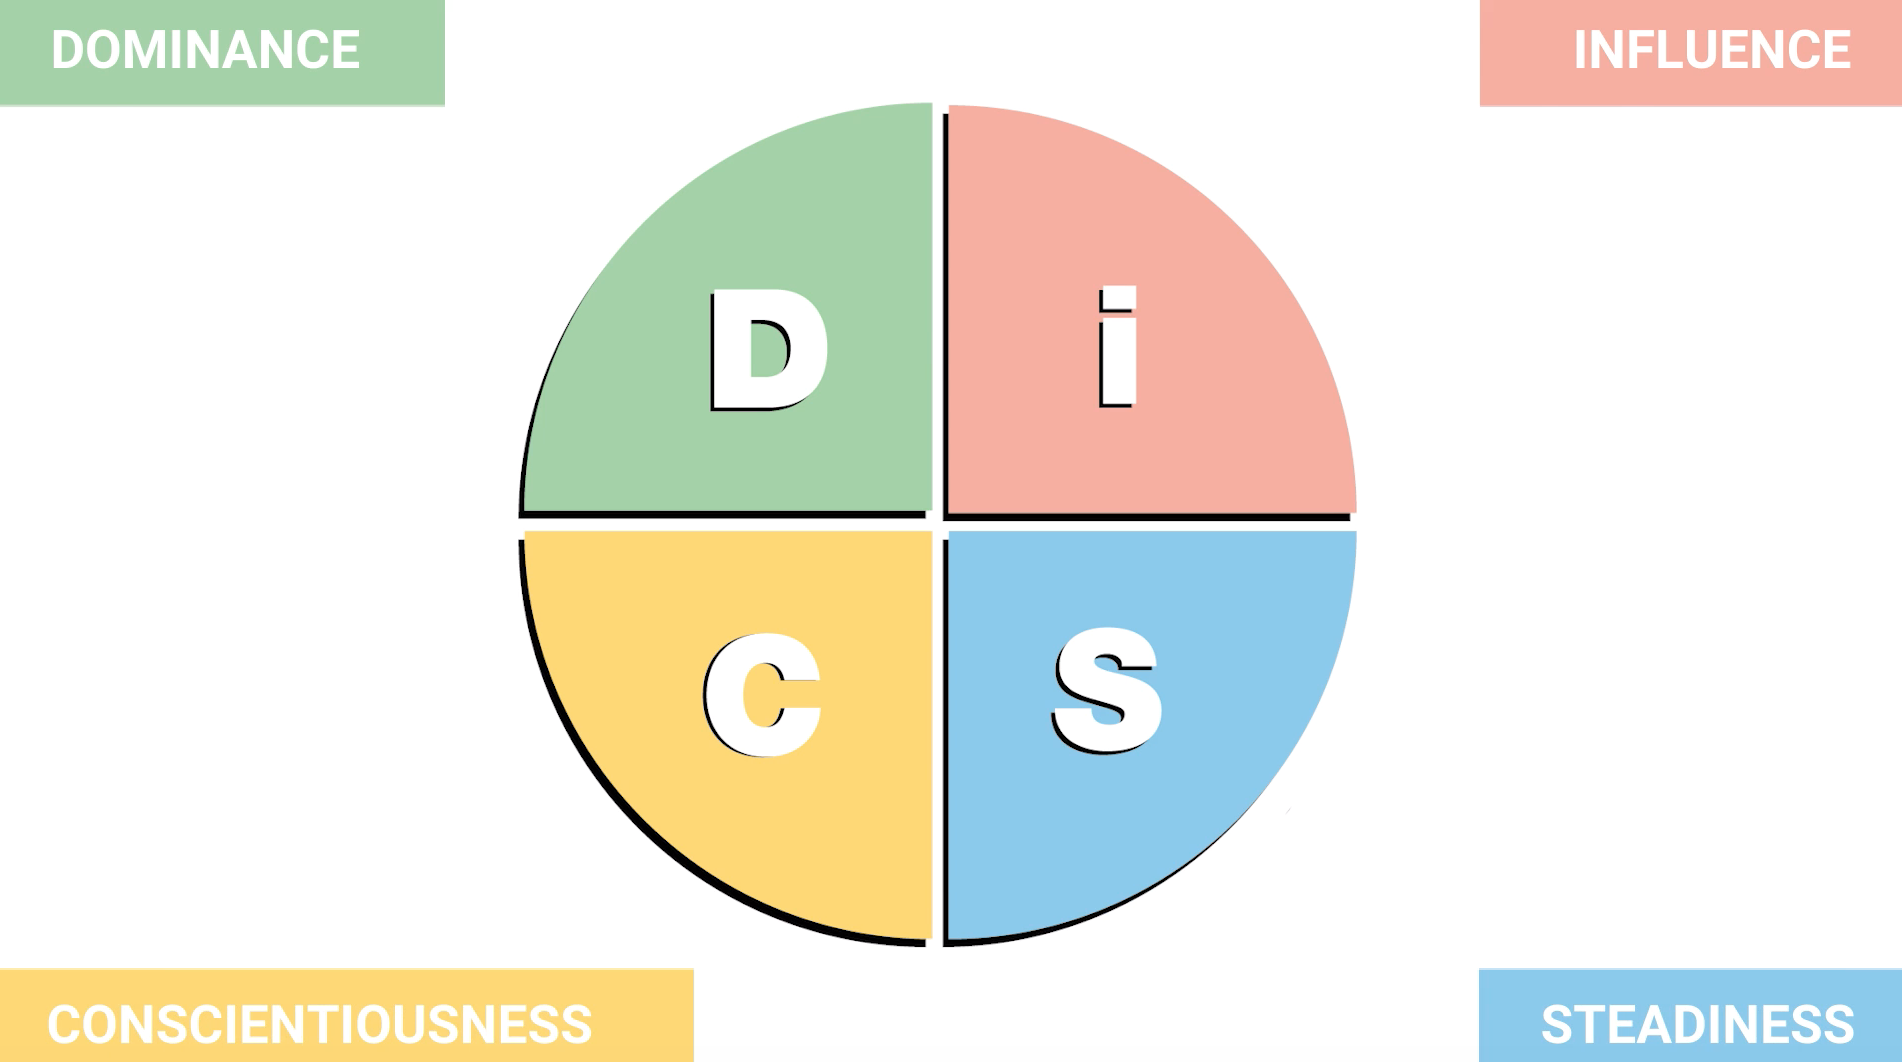 Disc personality test